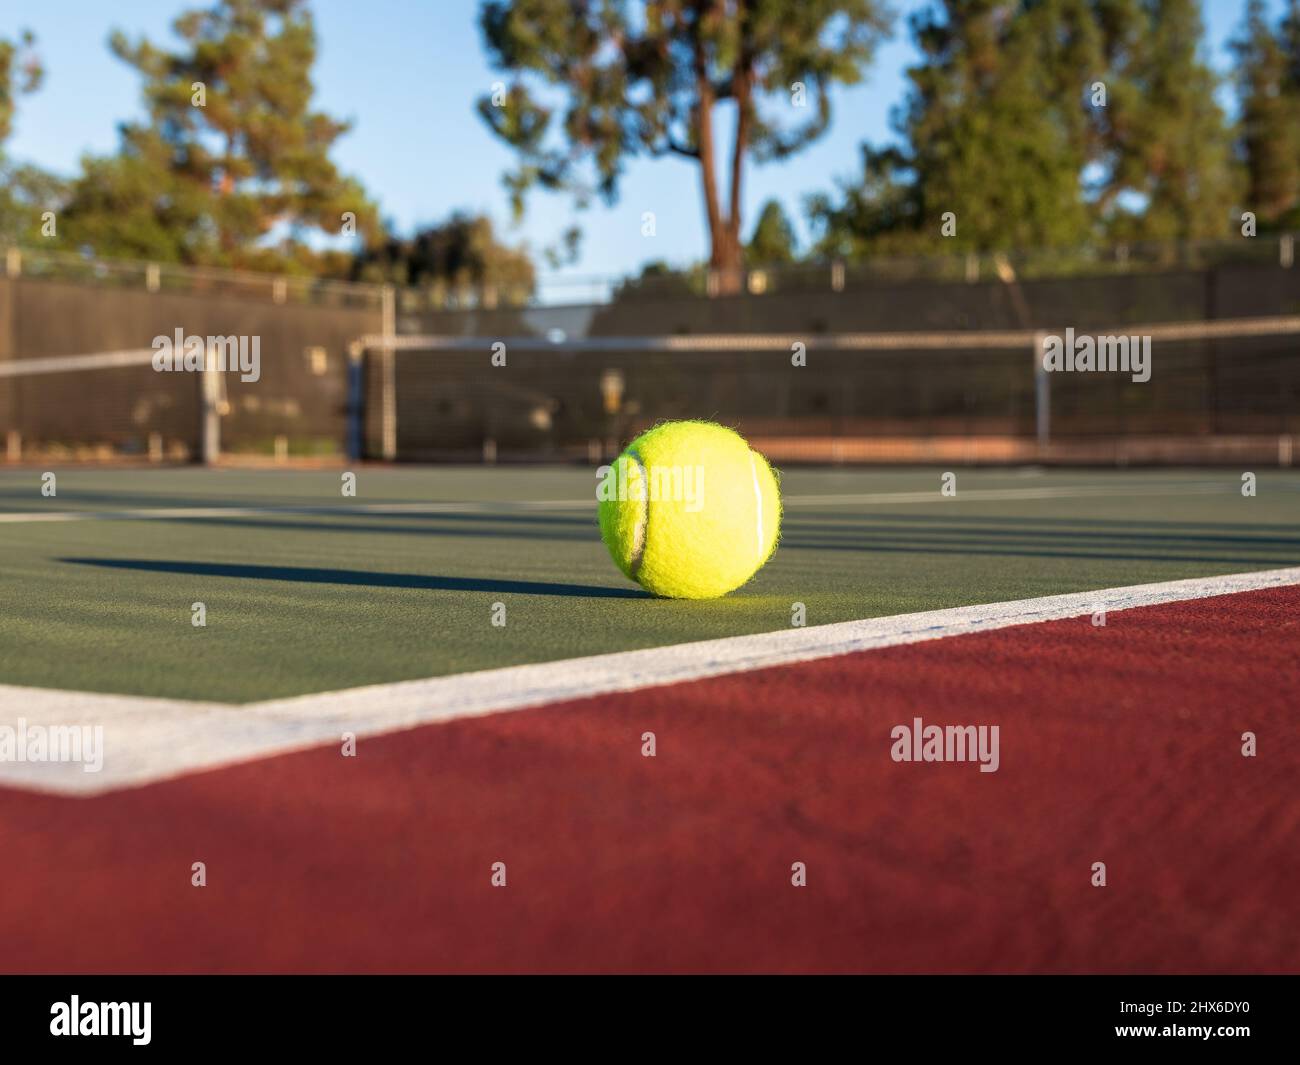 Yellow tennis ball on green court with black net and treelike in background. Red surrounding surface. Stock Photo